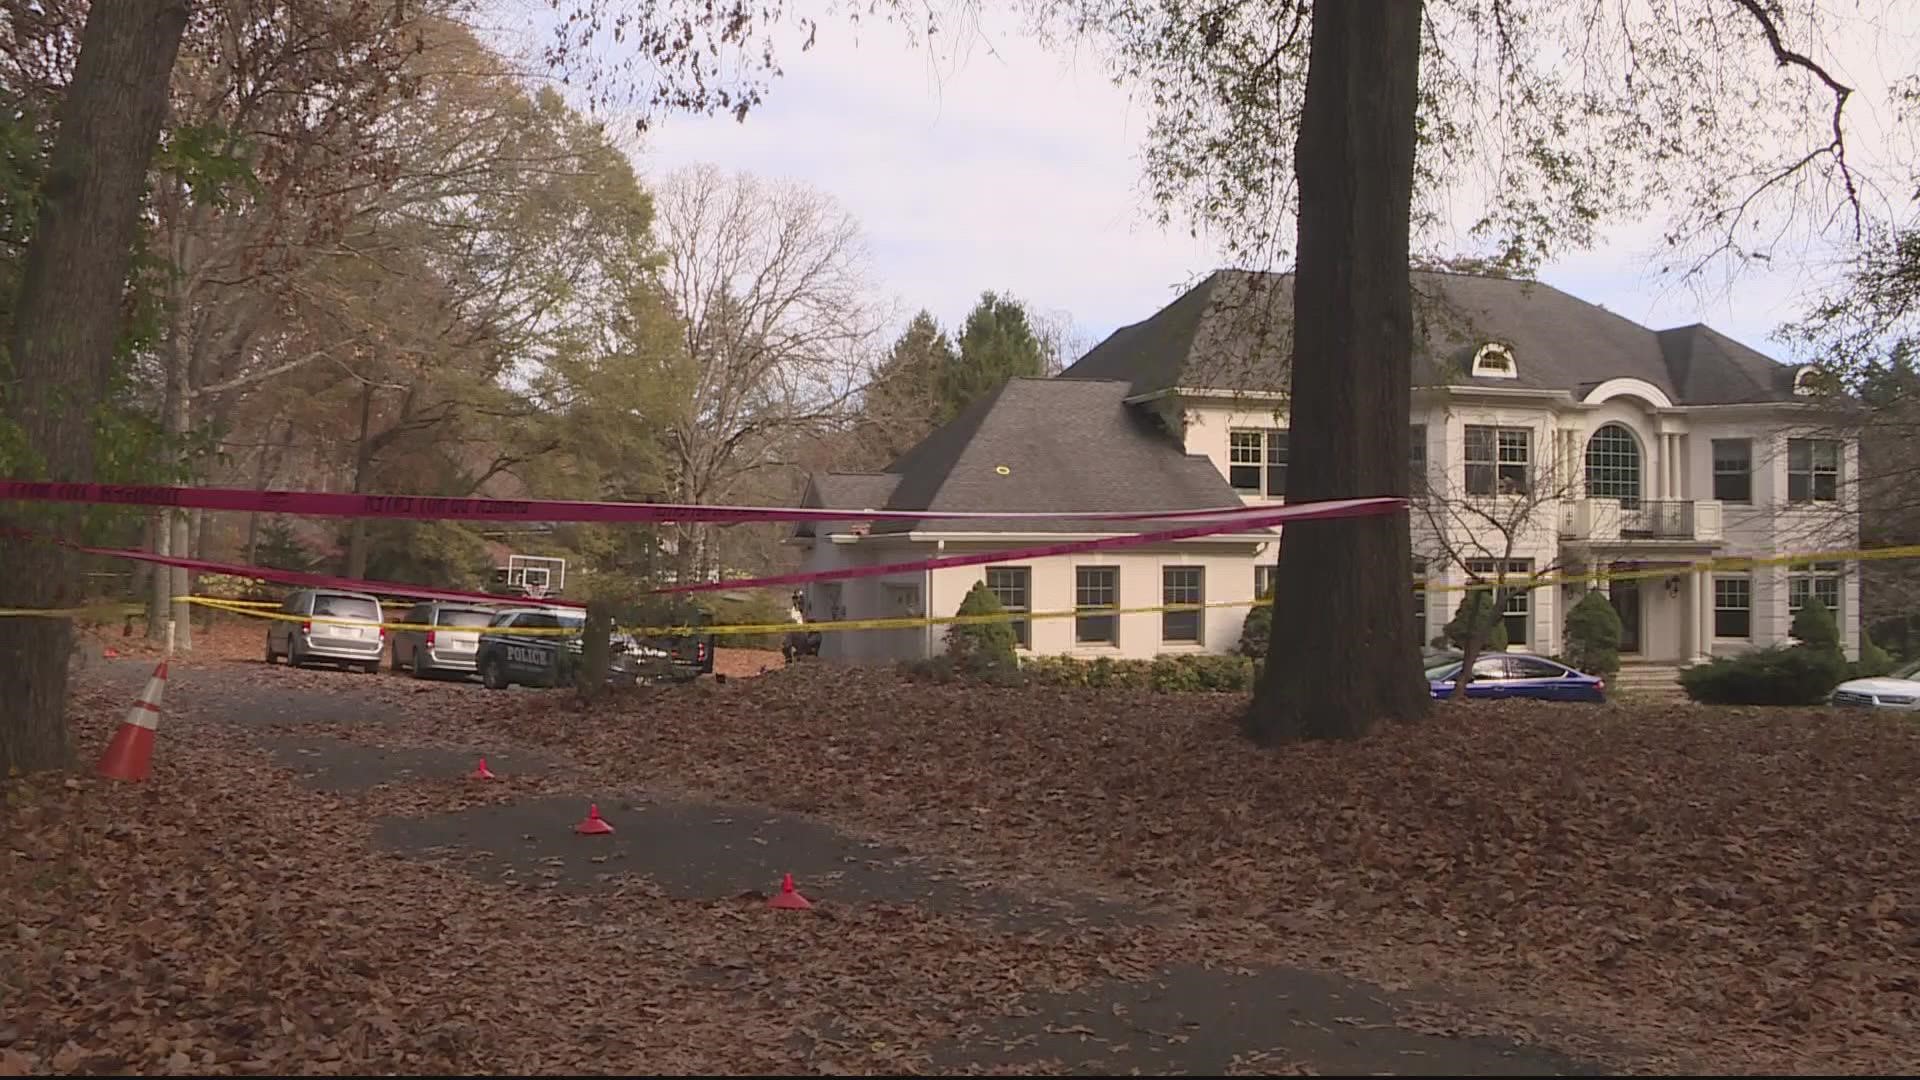 Police say a homeowner shot and killed a man with a large rock who followed him into his home.
It happened at a home on Waples Mill Road in Oakton.